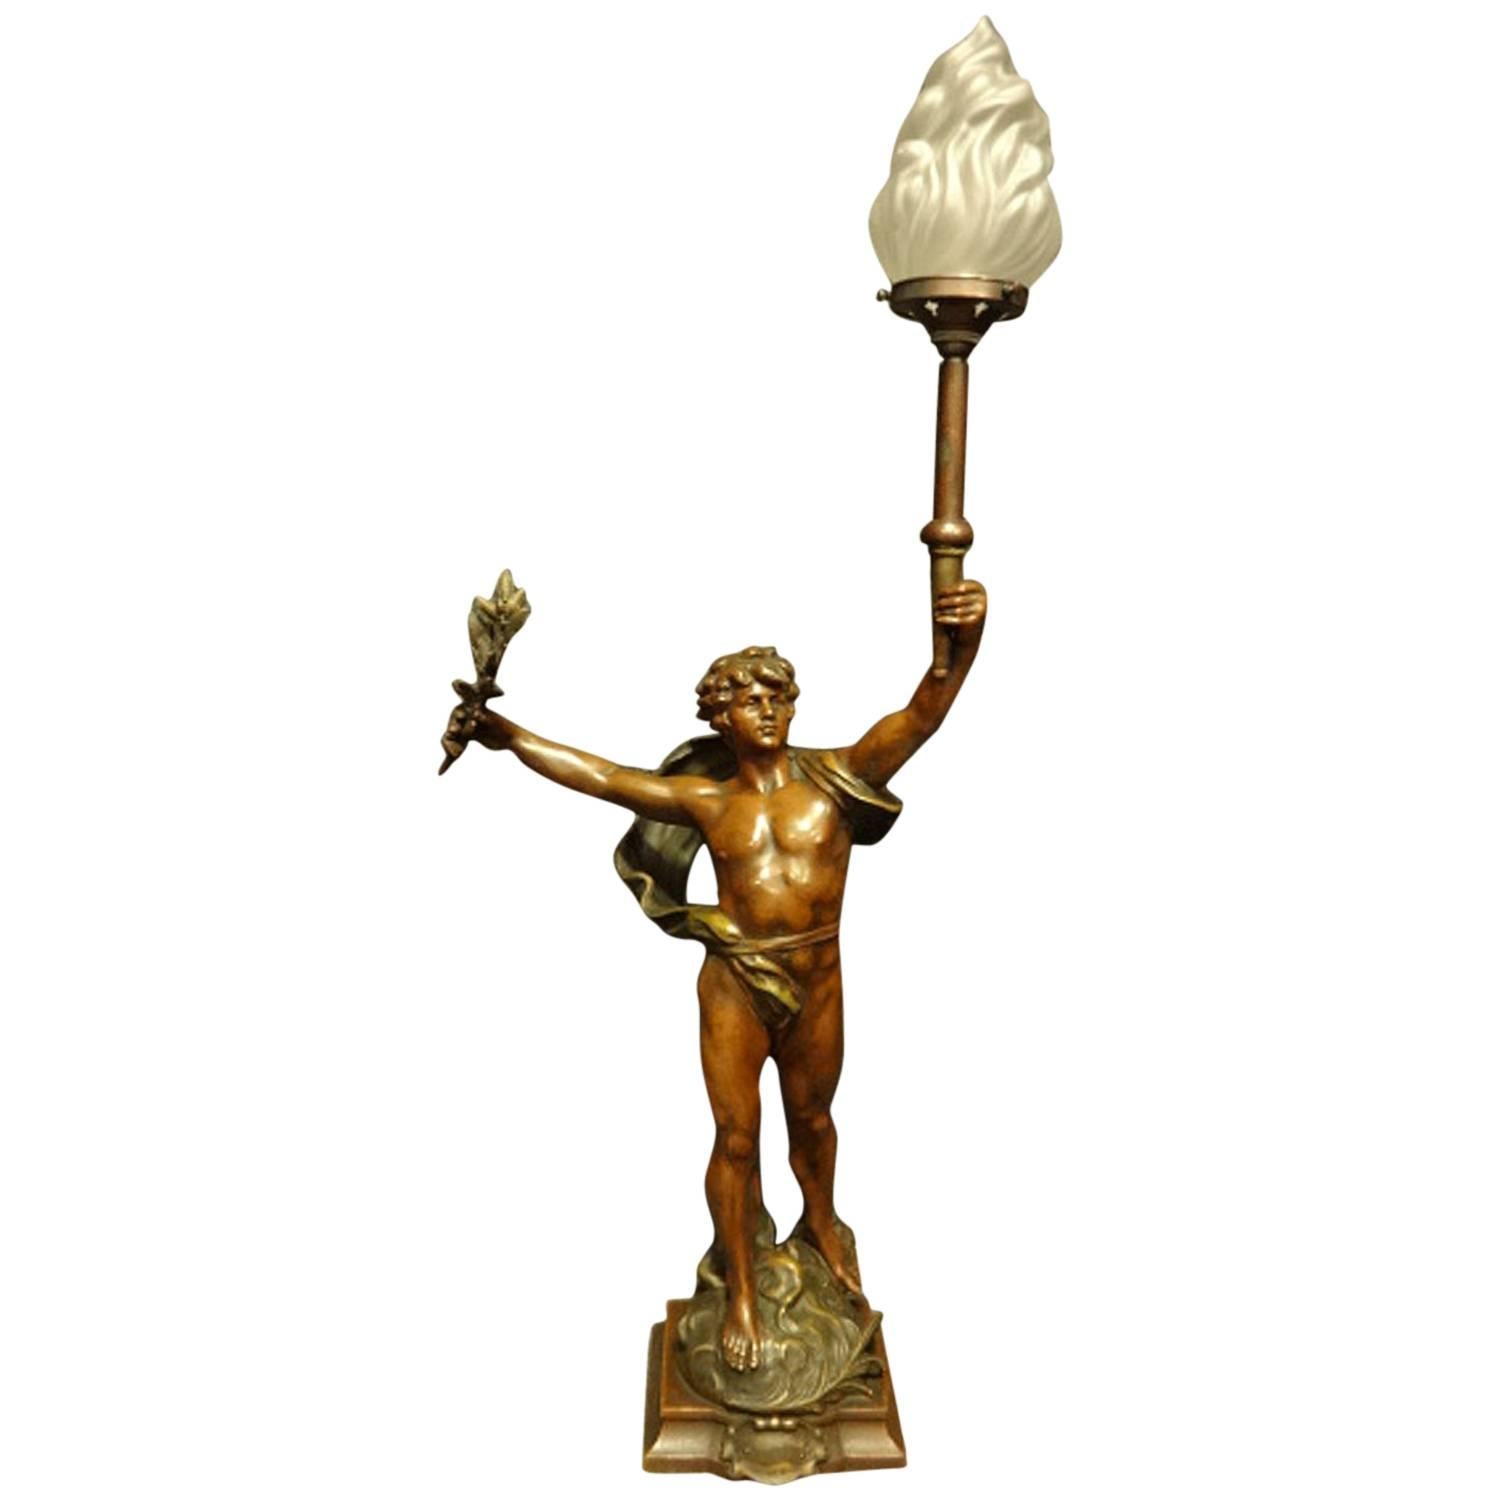 Lovely French Bronzed Spelter Lamp 'Primax' Signed Moreau, C.1900 For Sale